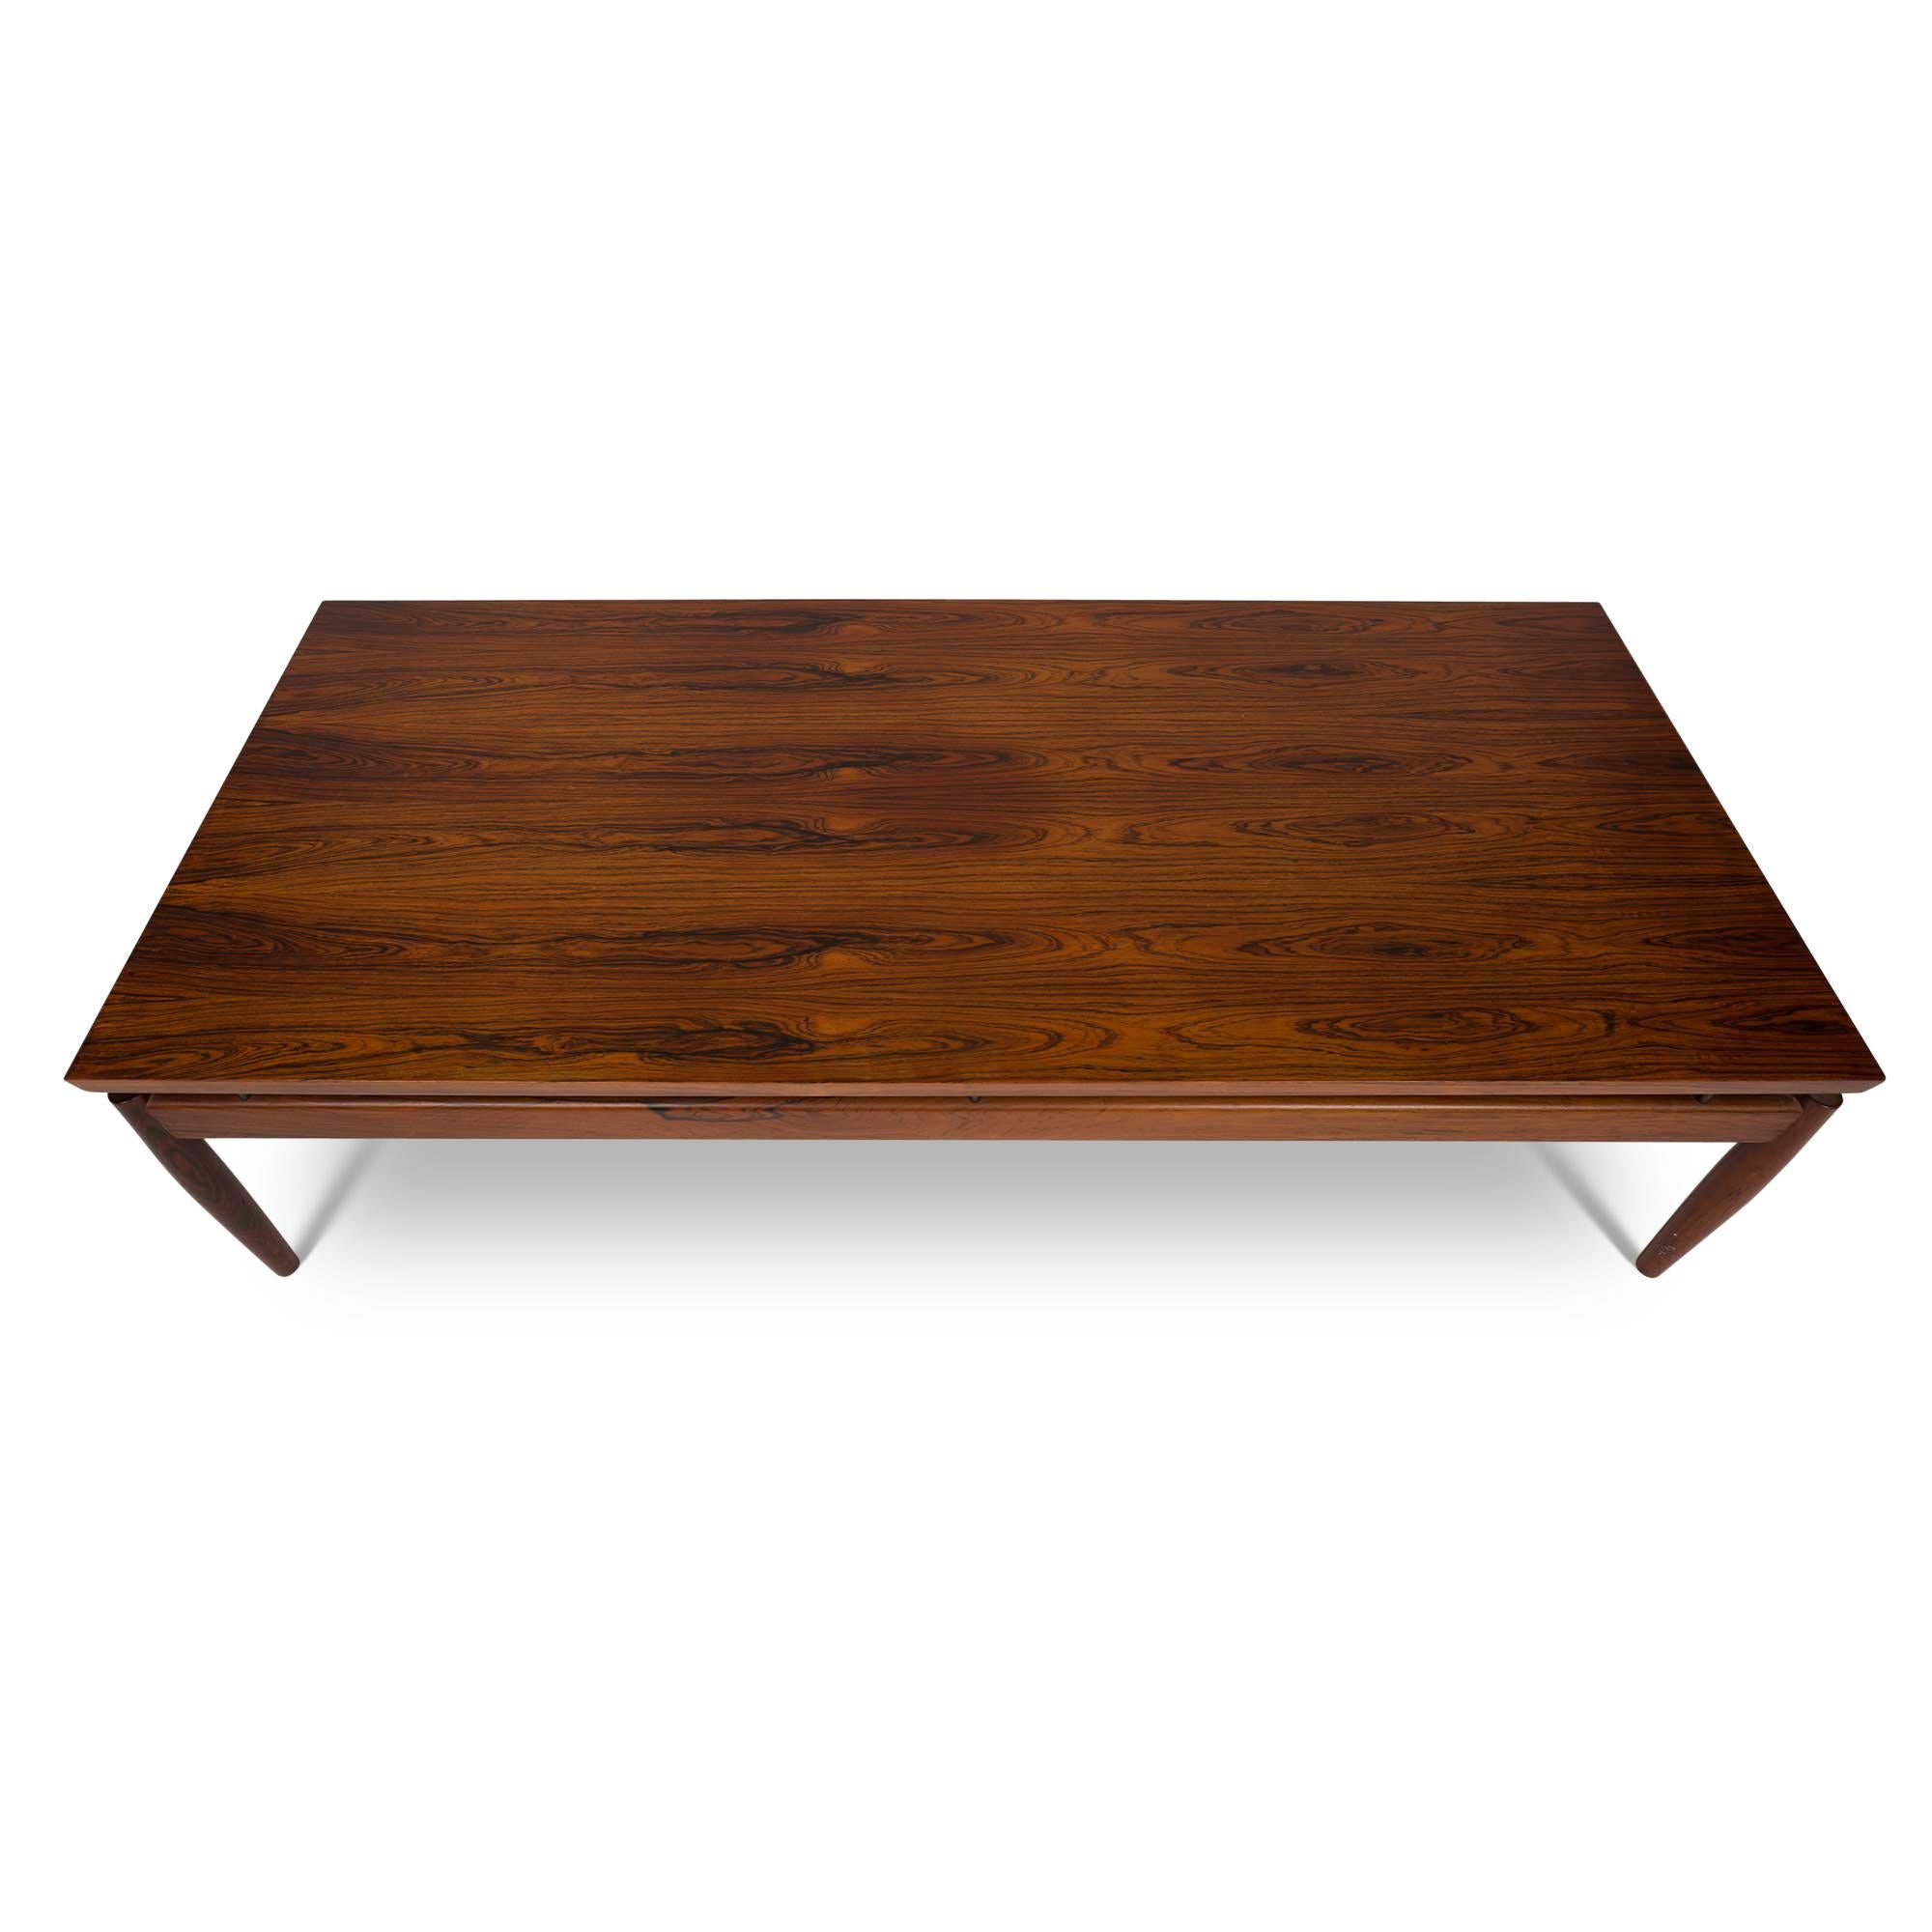 Mid-Century Modern Vintage Rosewood Floating Top Coffee Table by Grete Jalk for France & Søn Denmar For Sale